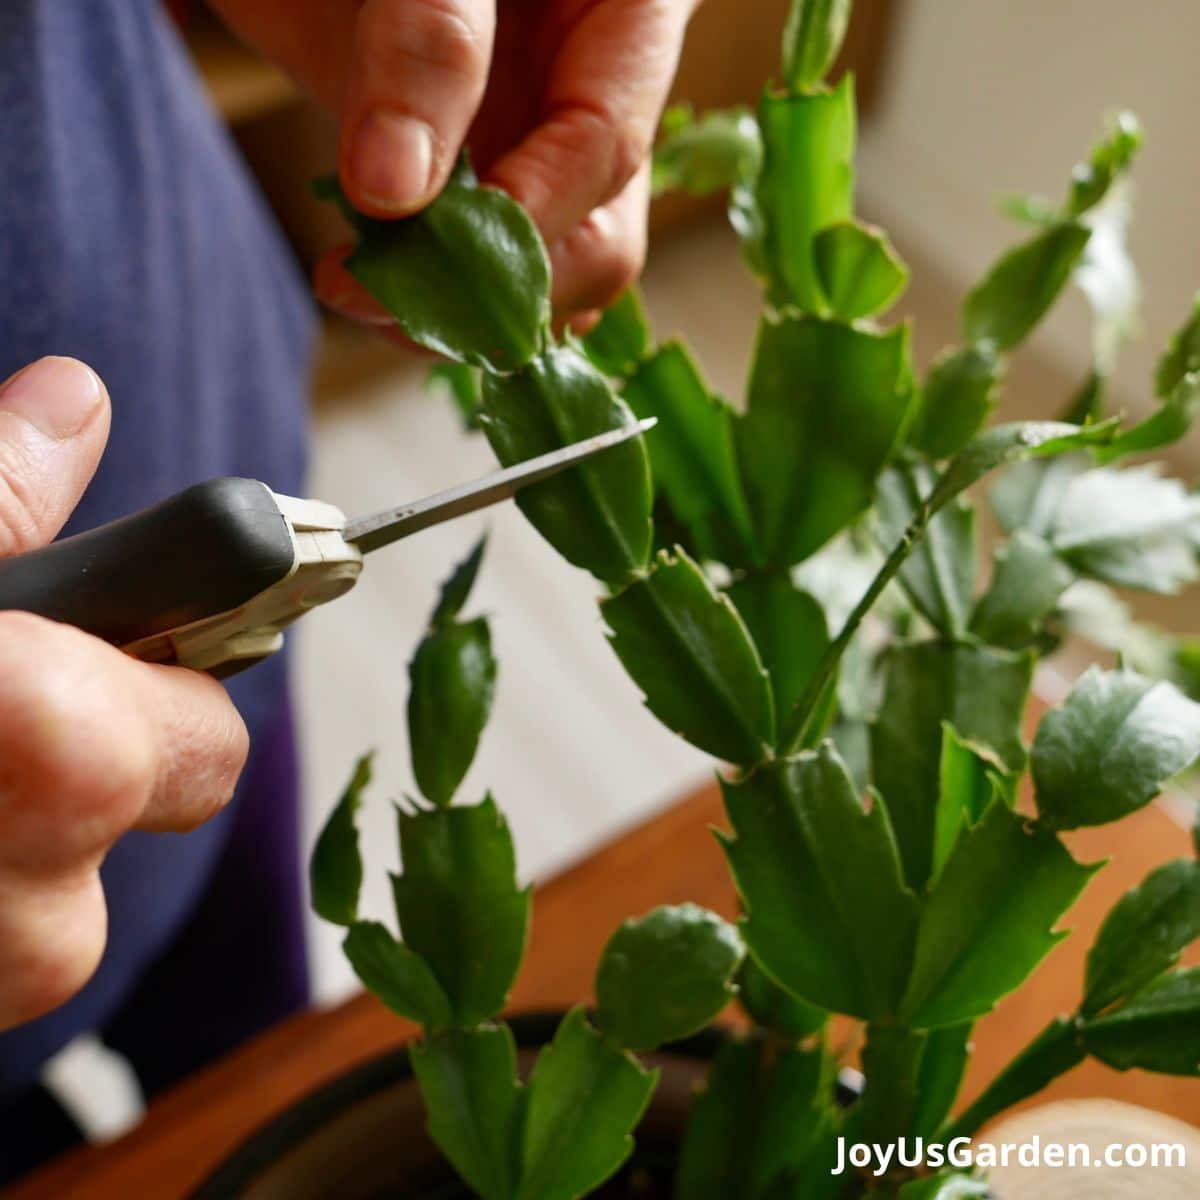 nell foster with floral snips showing where to not cut a thanksgiving cactus christmas cactus cutting